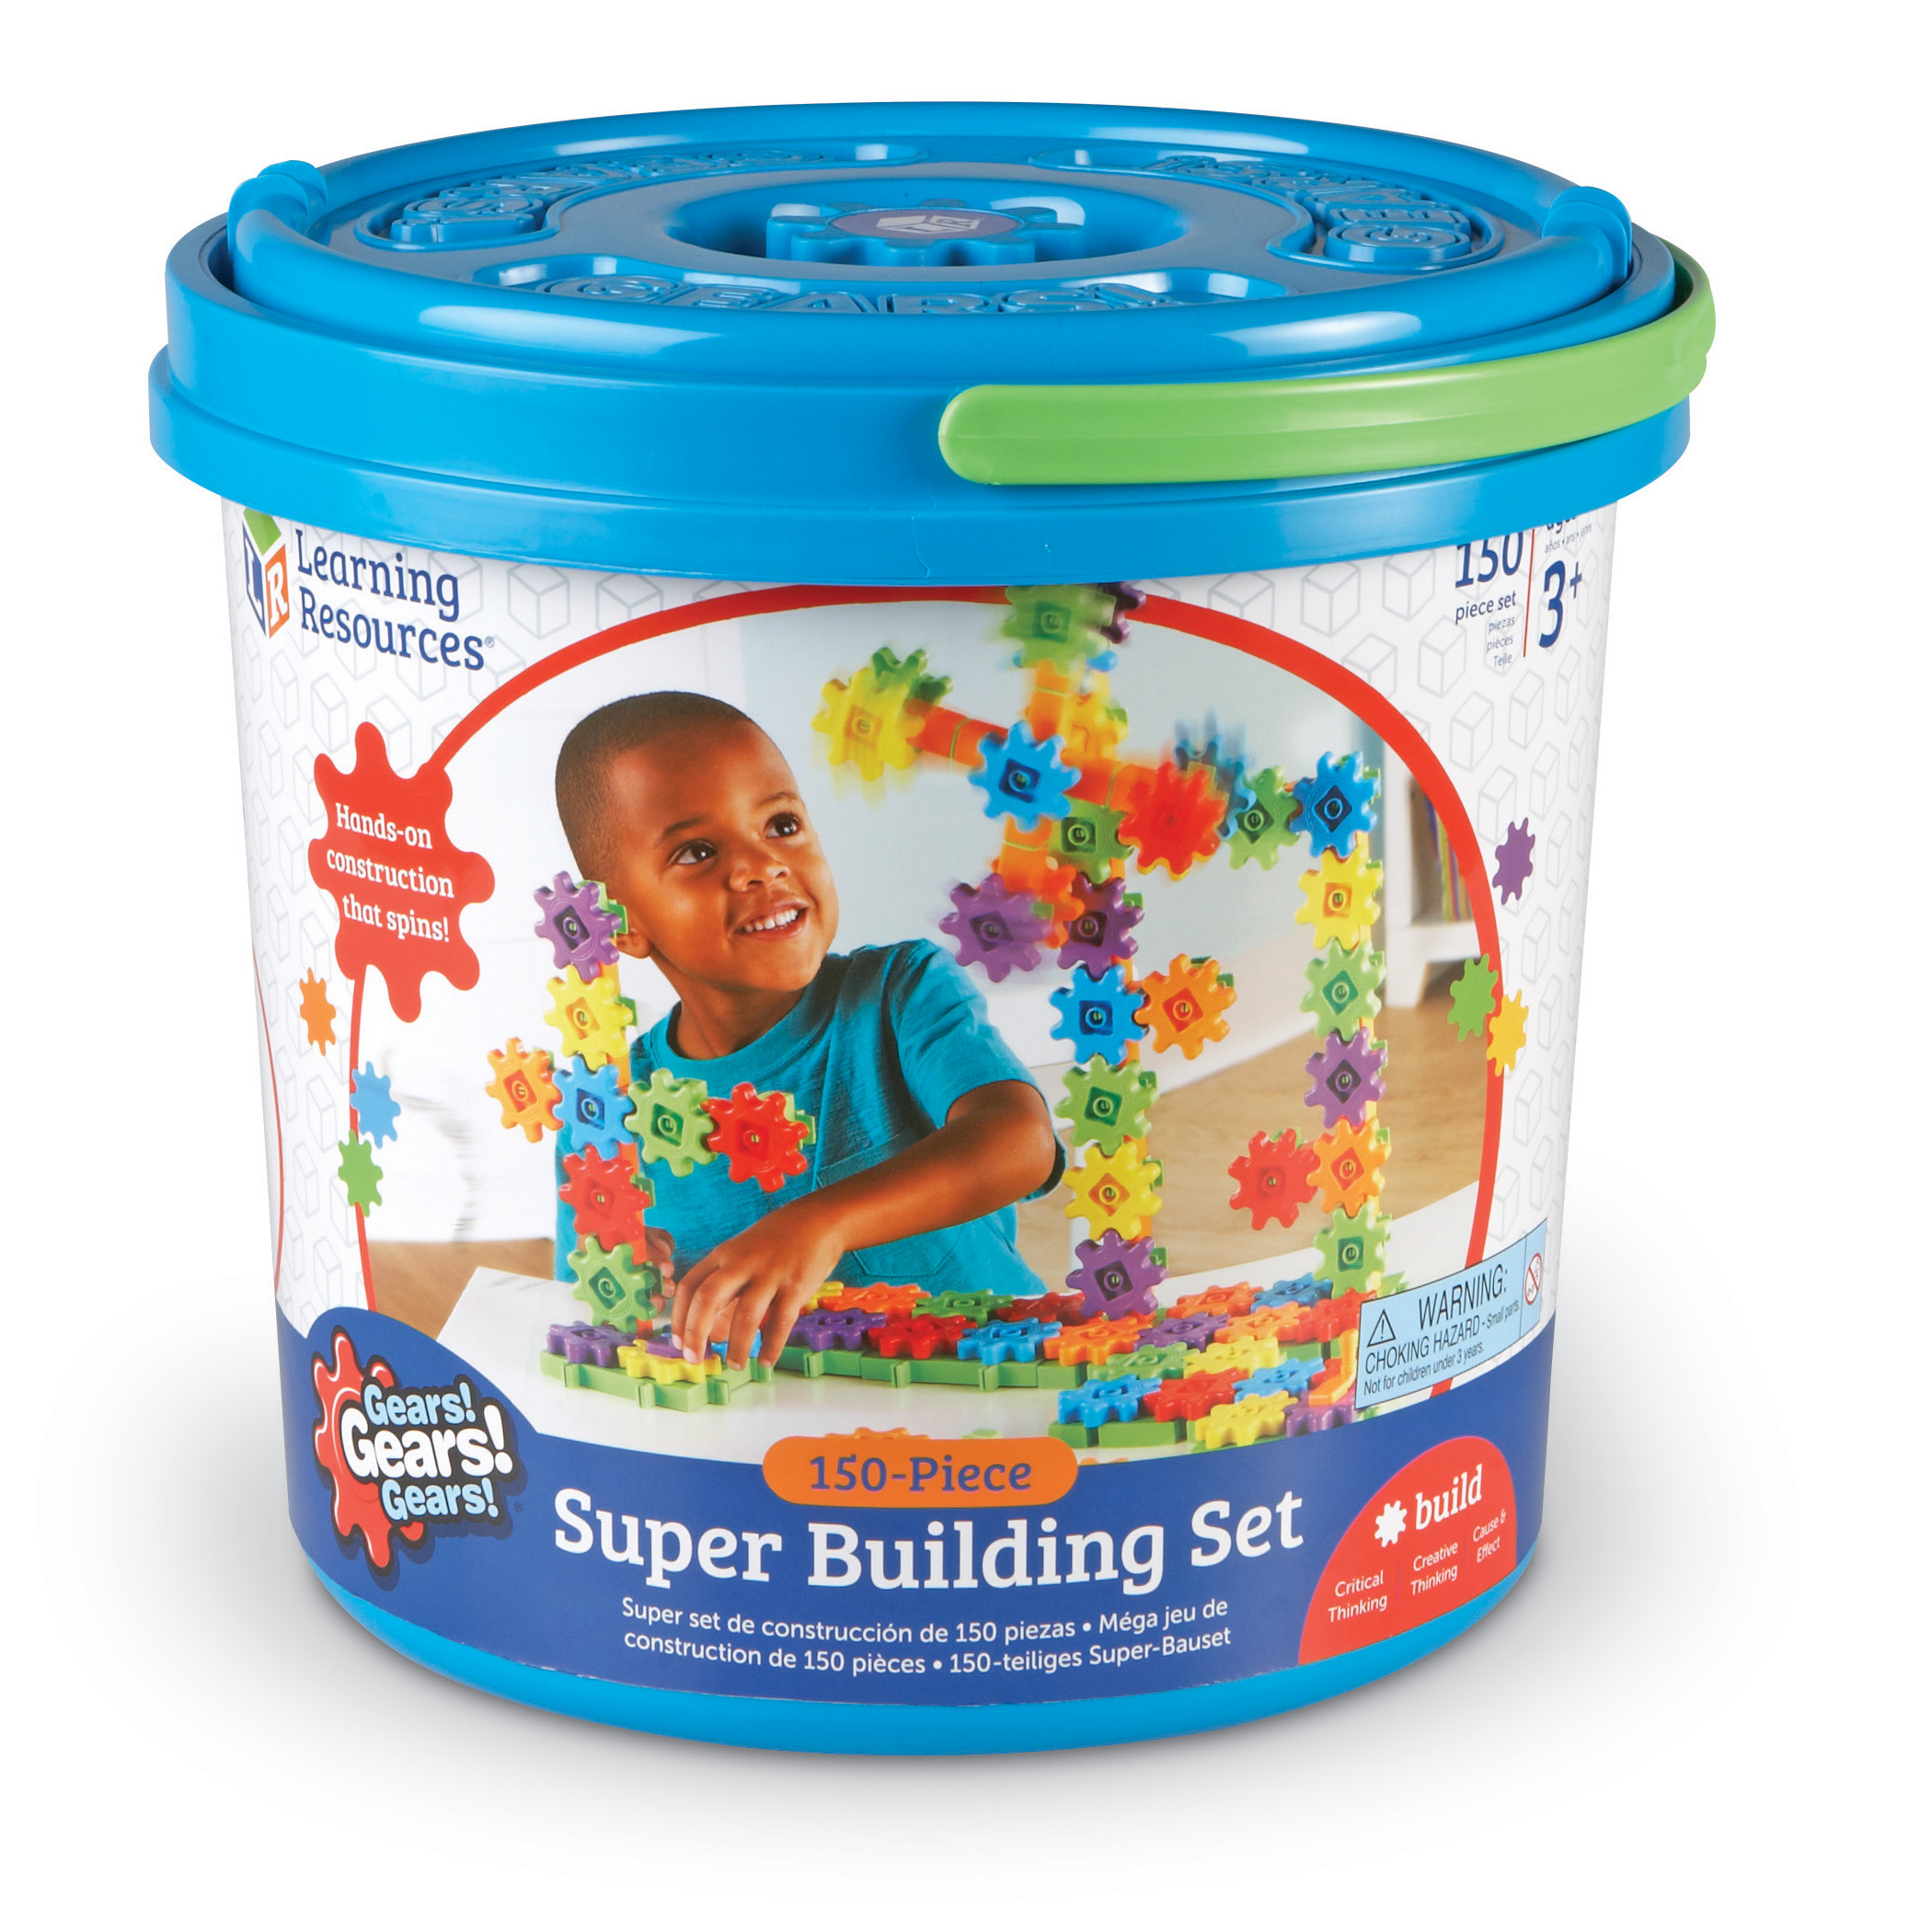 Learning Resources Gears! Gears! Gears! 150-Piece Super Building Set image number null